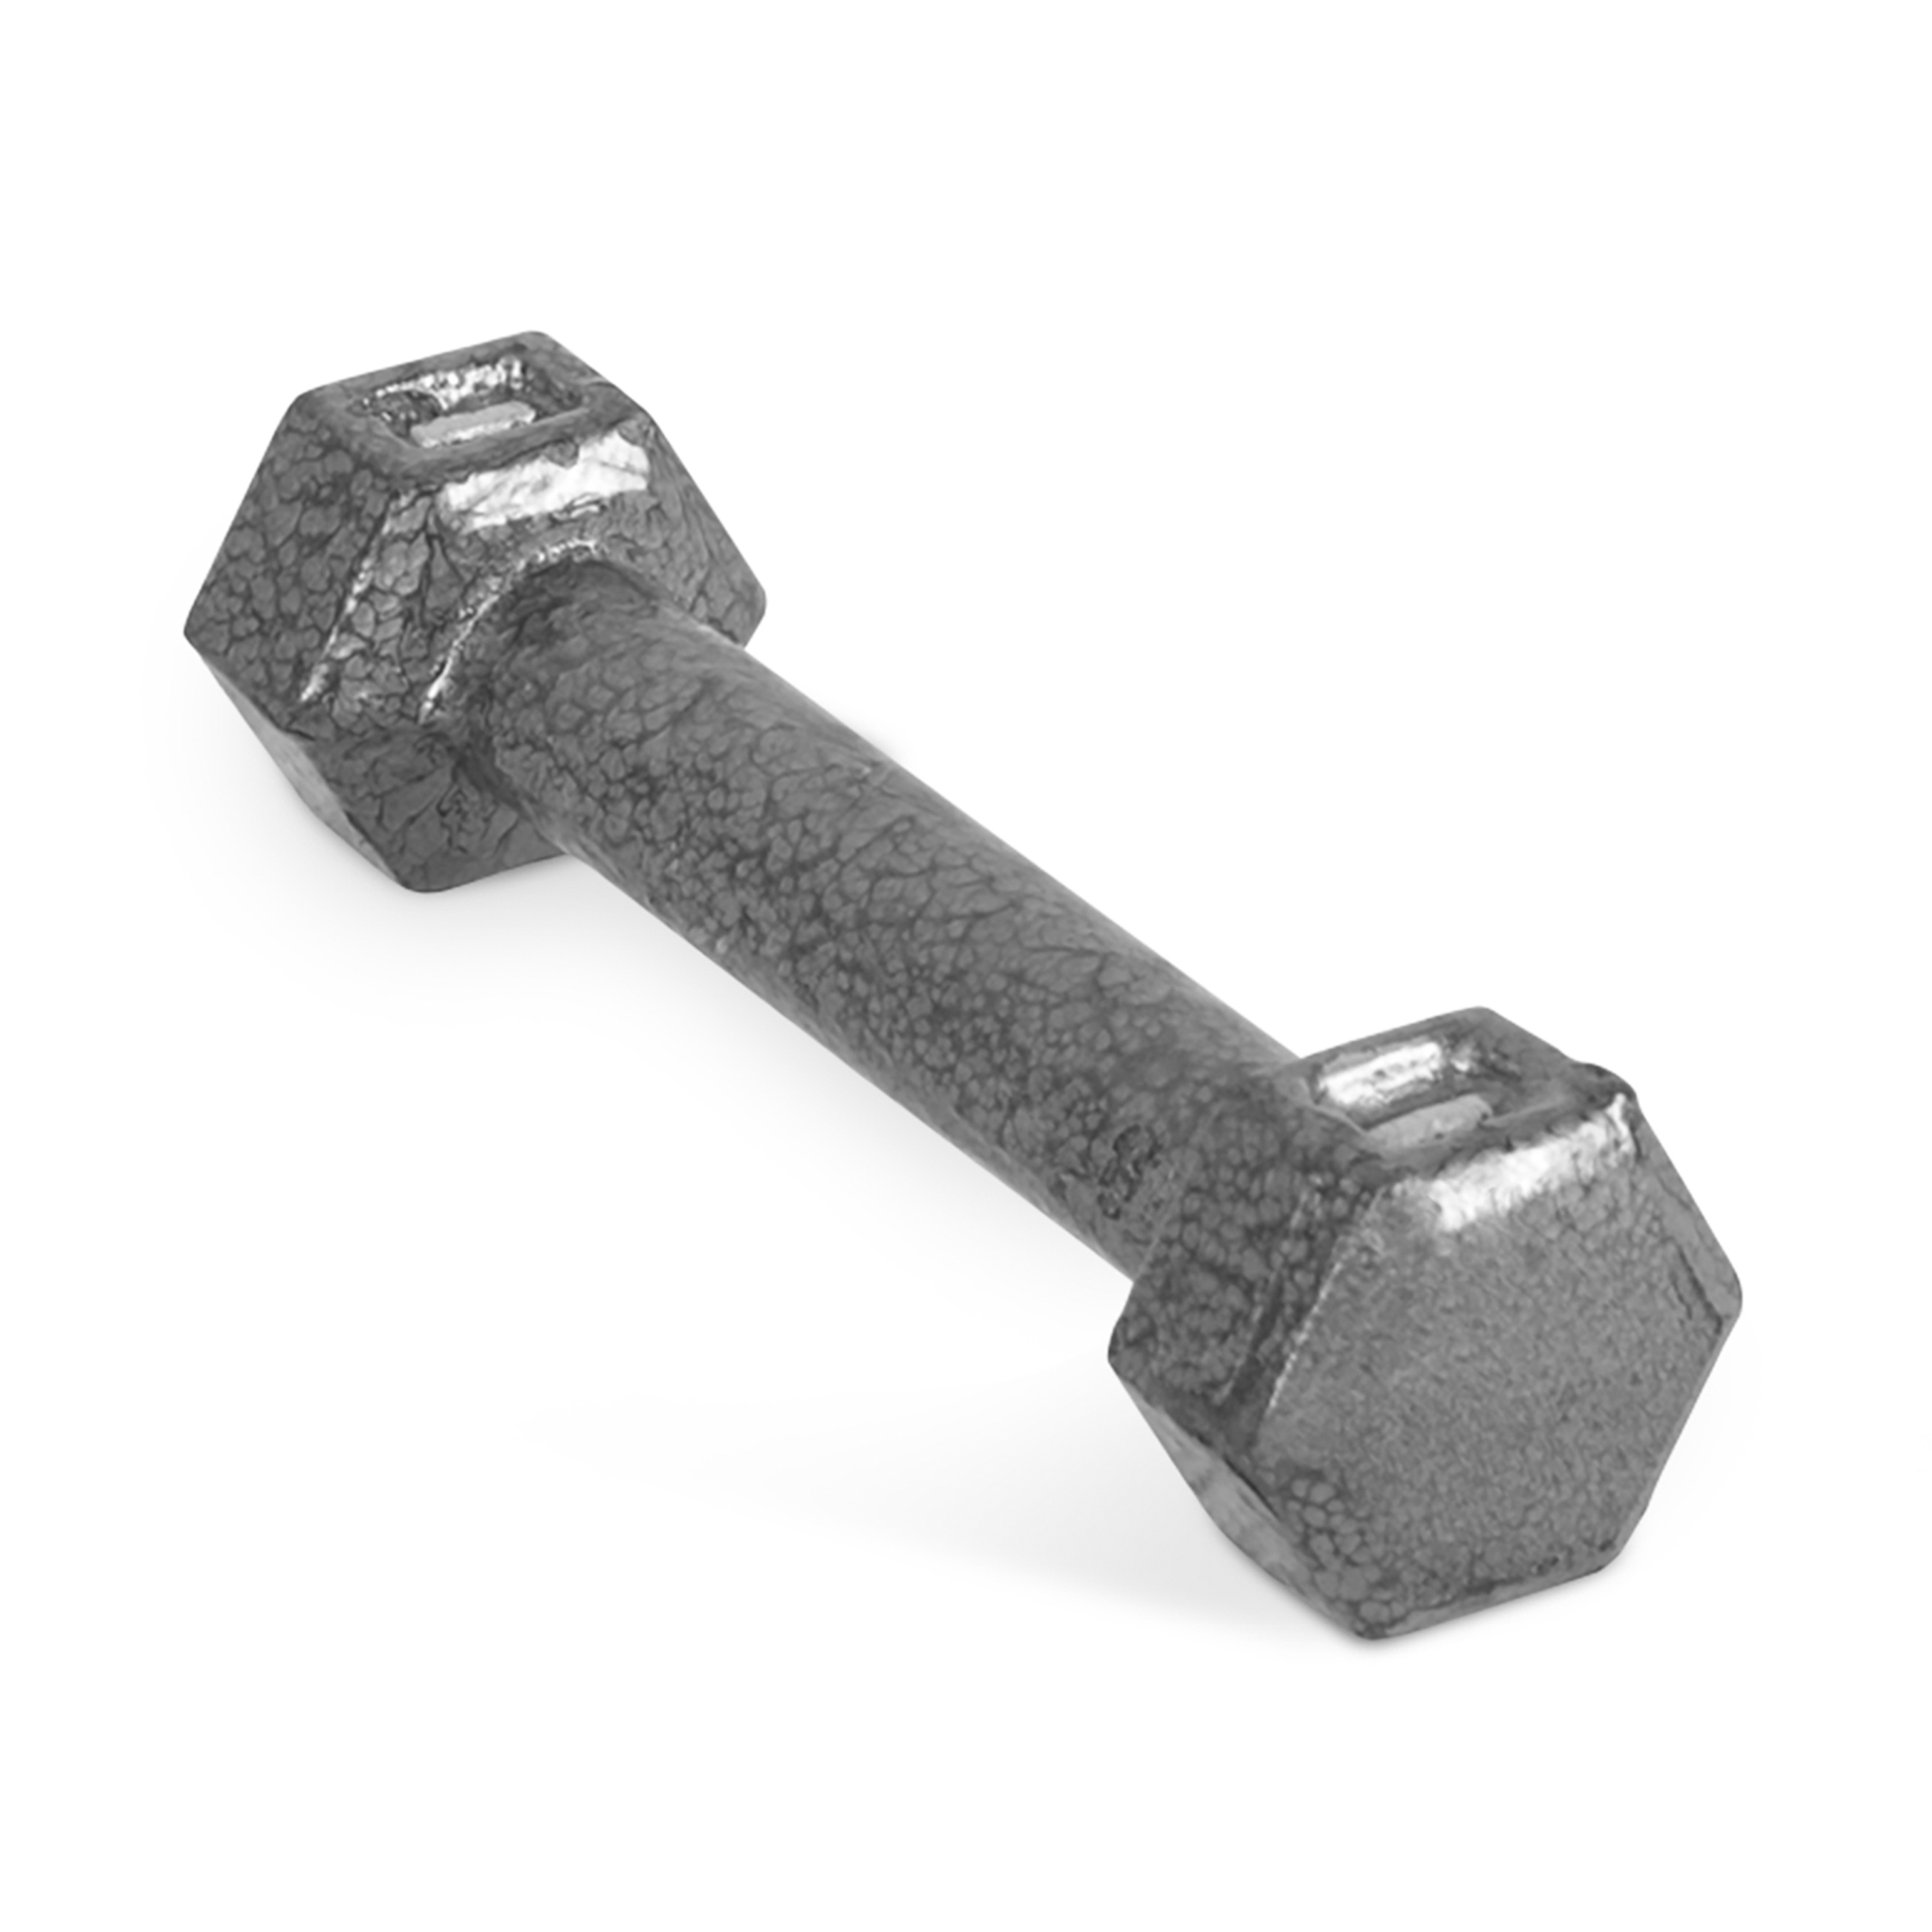 CAP Barbell 1lb Cast Iron Hex Dumbbell, Single - image 1 of 6